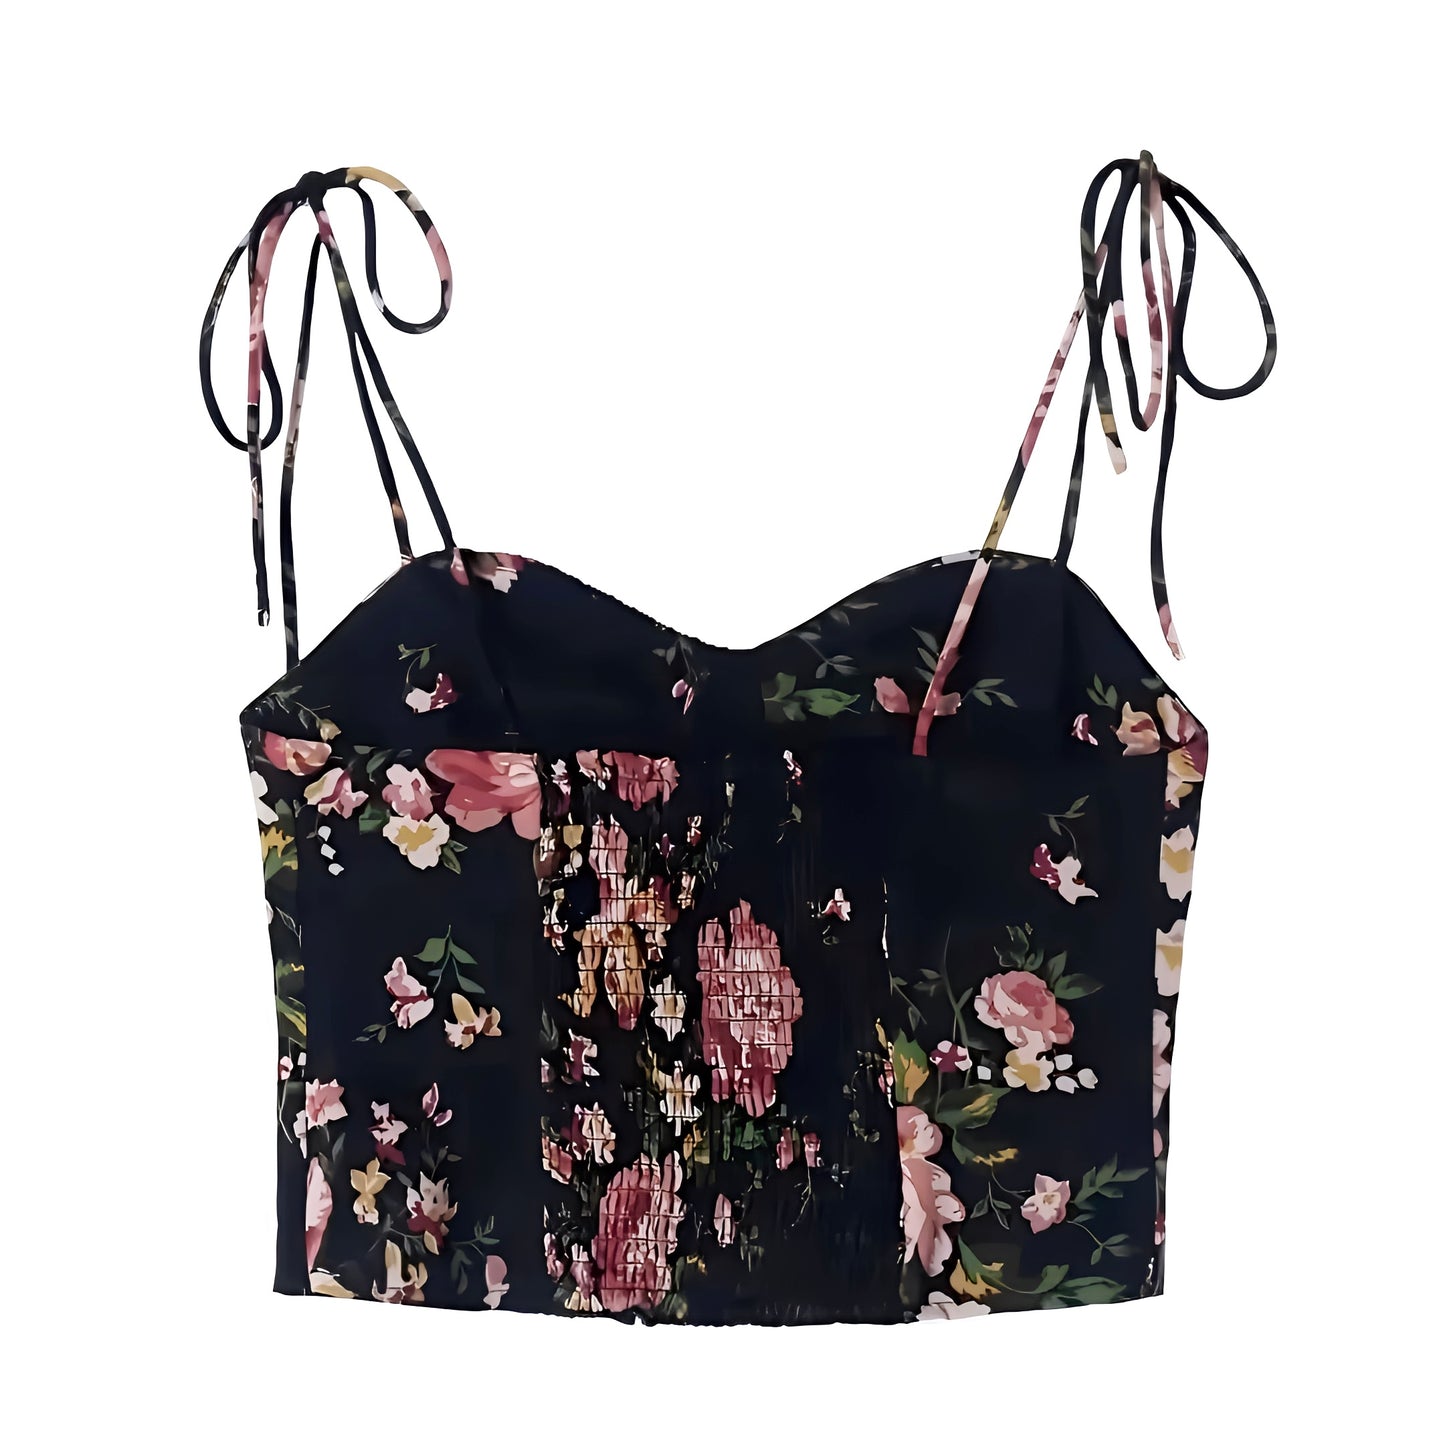 floral-print-black-pink-multi-color-rose-flower-patterned-slim-fit-corset-bustier-spaghetti-strap-sleeveless-backless-open-back-crop-cami-tank-top-blouse-spring-2024-summer-chic-women-ladies-elegant-casual-classy-feminine-semi-formal-preppy-style-zara-revolve-princess-polly-altard-state-edikted-urban-outfitters-brandy-melville